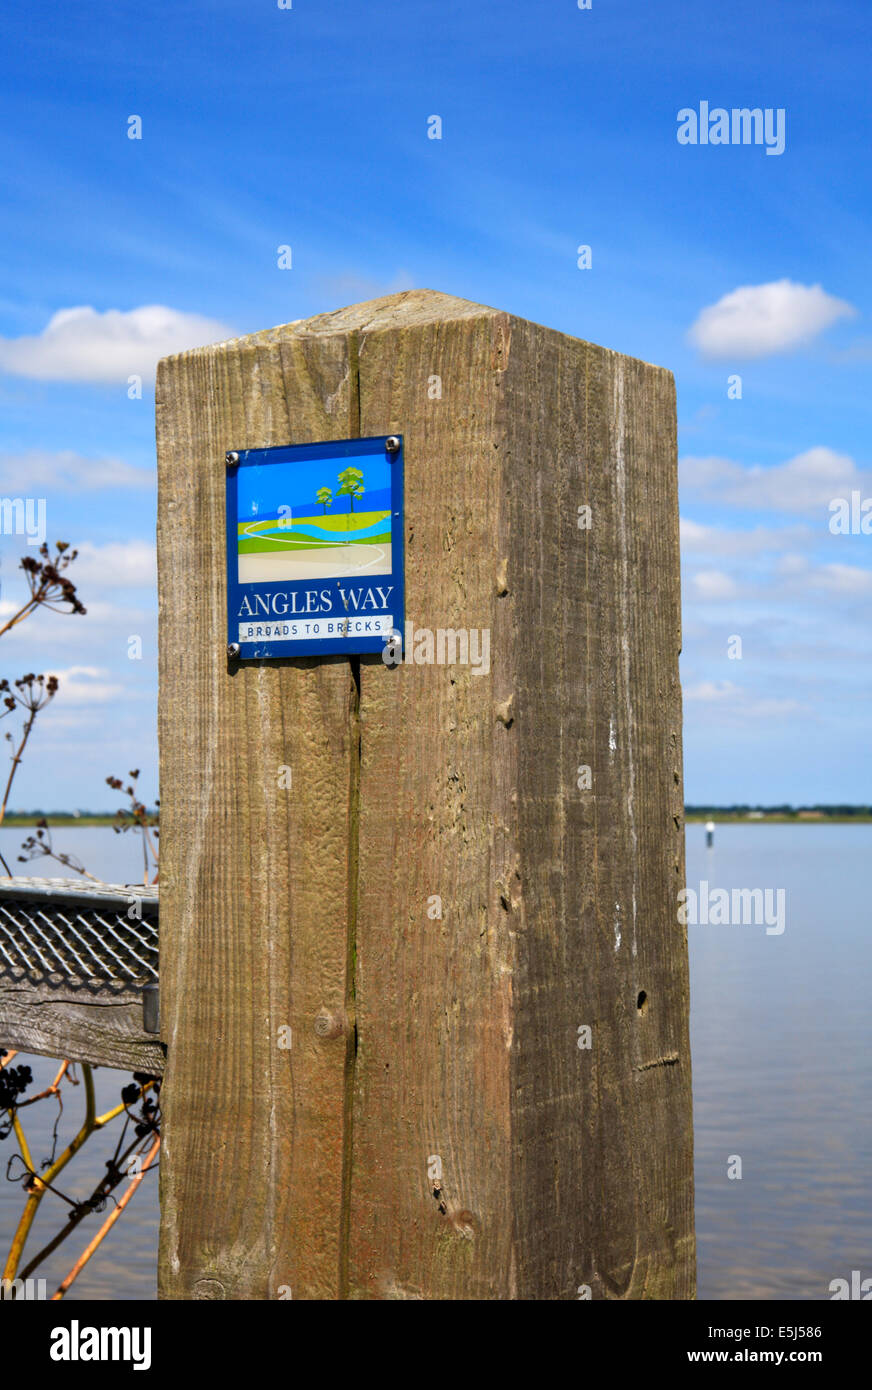 A post with sign indicating the Angles Way long distance footpath at Burgh Castle, Norfolk, England, United Kingdom. Stock Photo